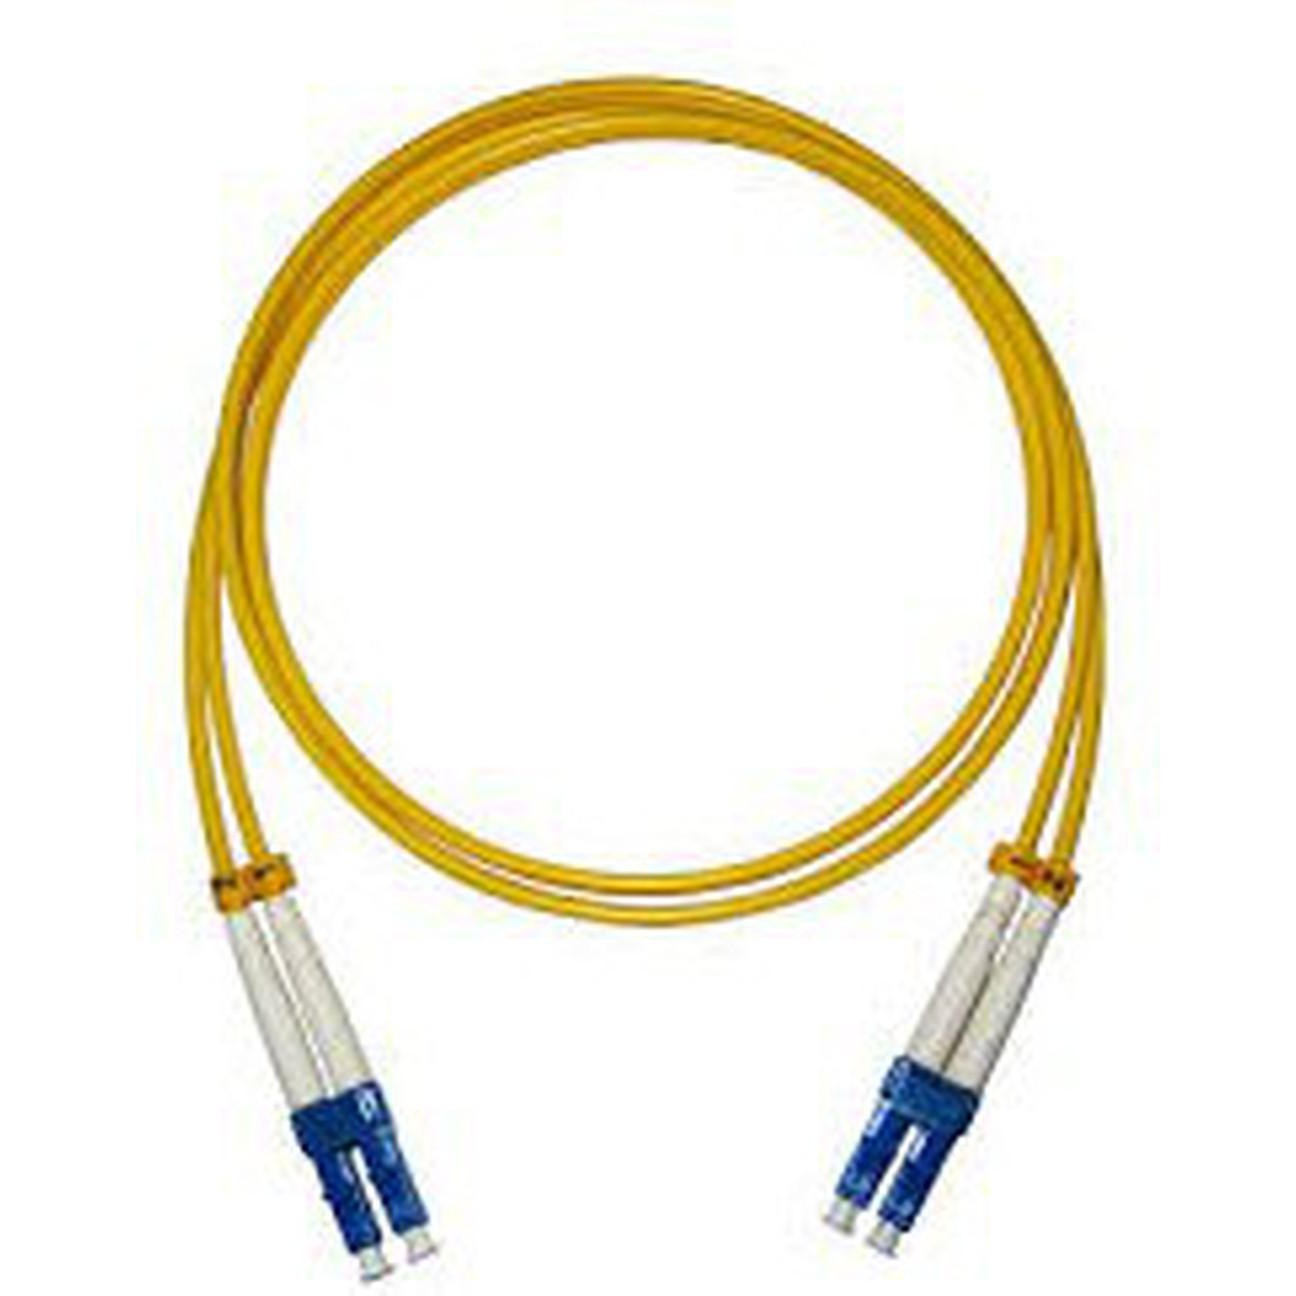 Kuwes Fiber Patch Cord Lc-Lc 9/125Um Sm 1 Meter-Fiber Patch Cord-Kuwes-Star Light Kuwait